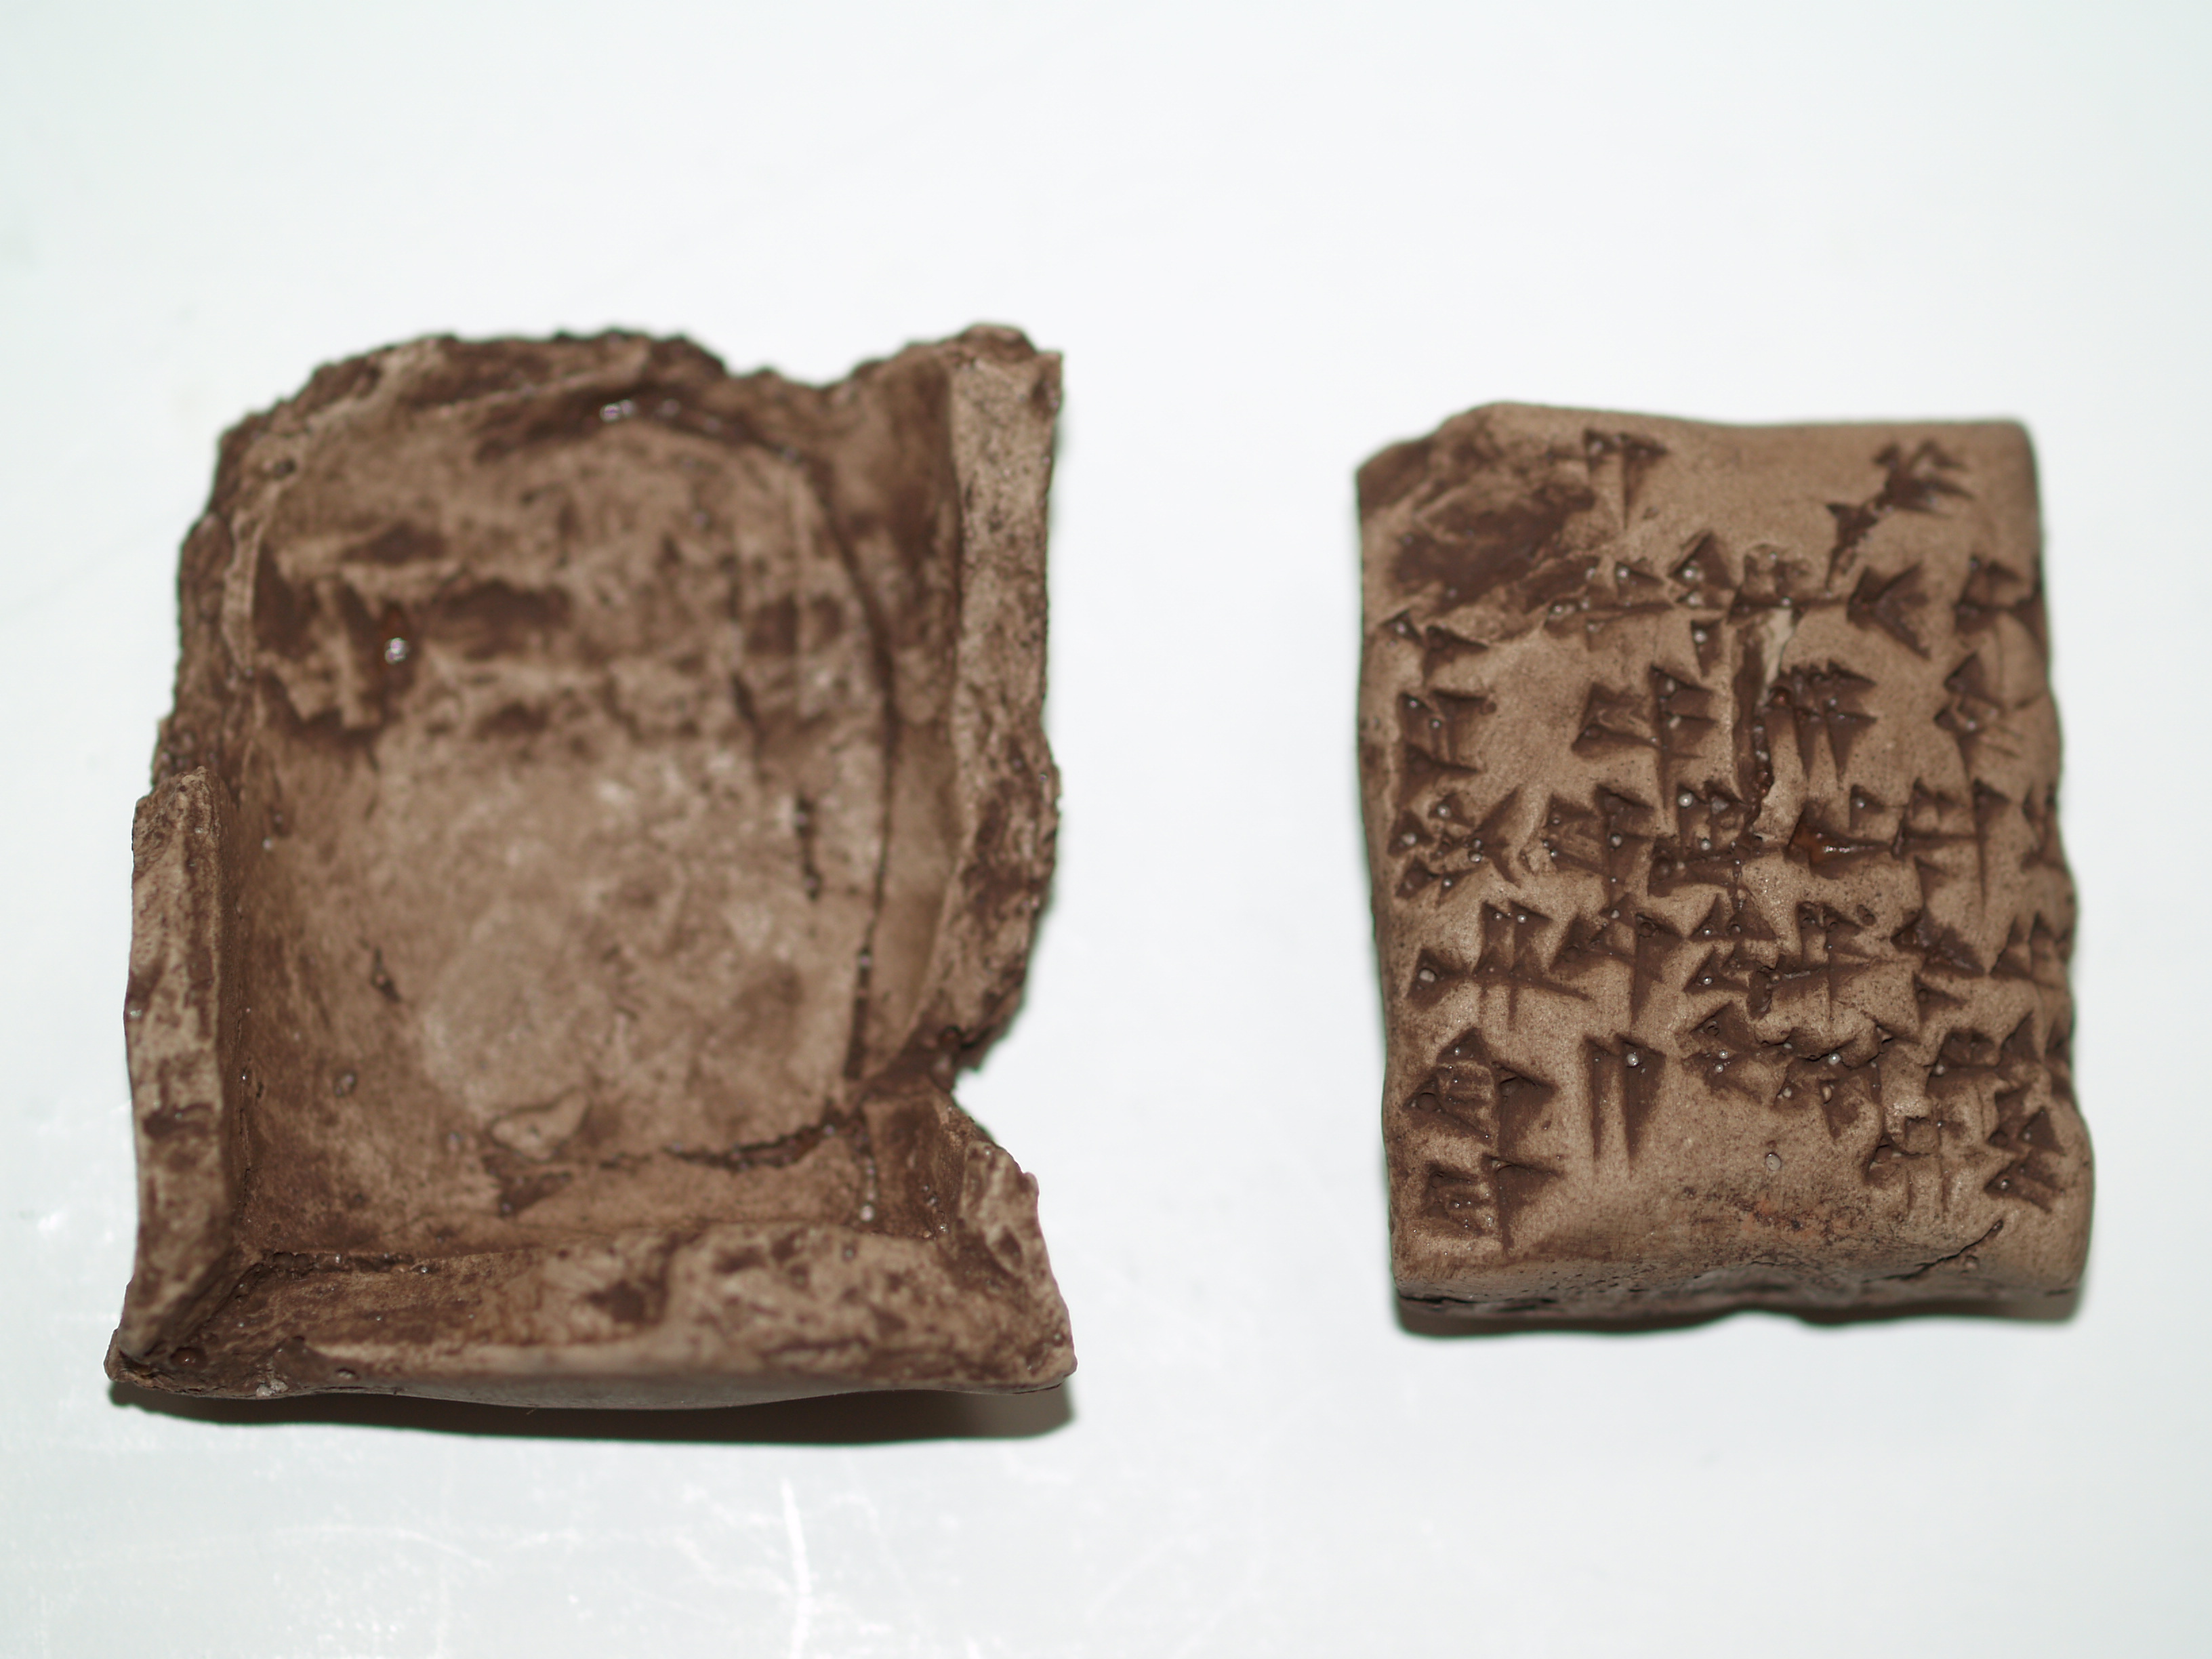 Babylonian Tablet with Envelope Recreation